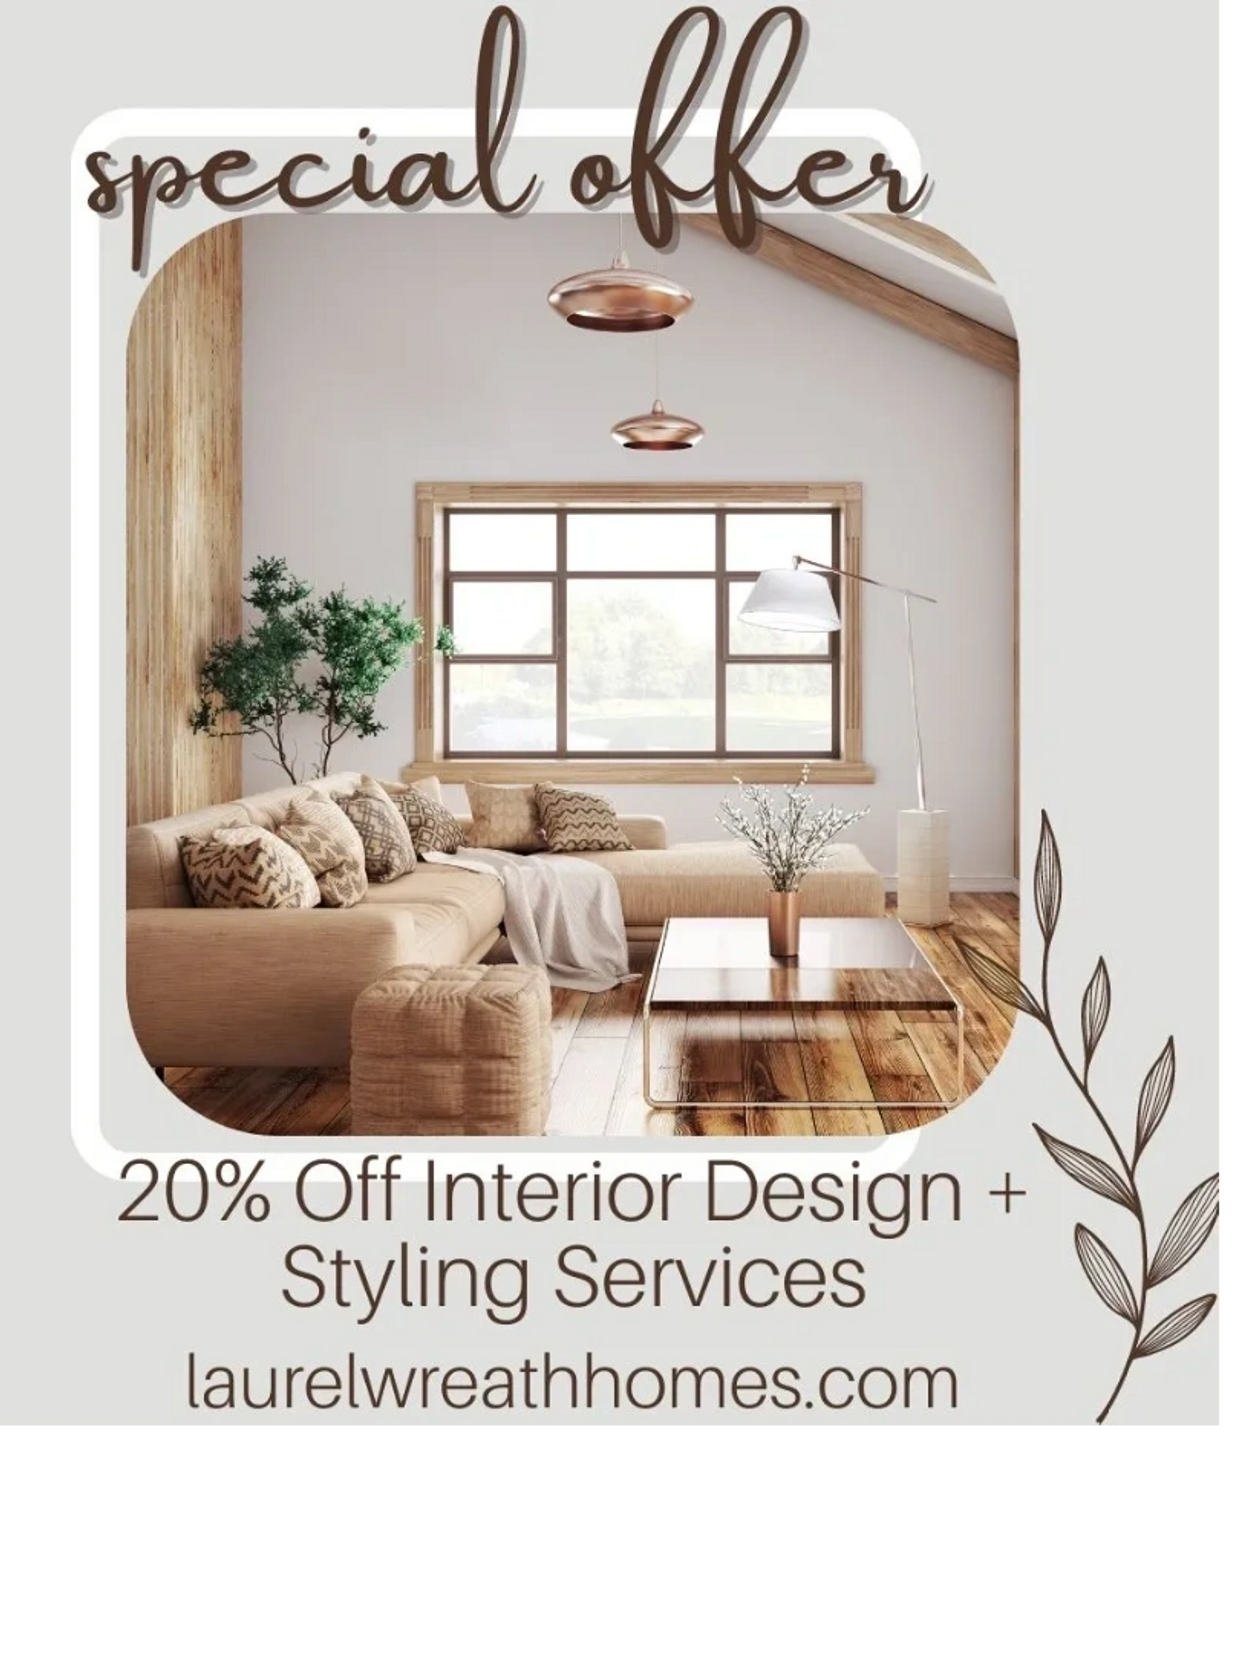 Special for the 1st two weeks of Aug! All styling + design services - even eDesign - are 20% off! 